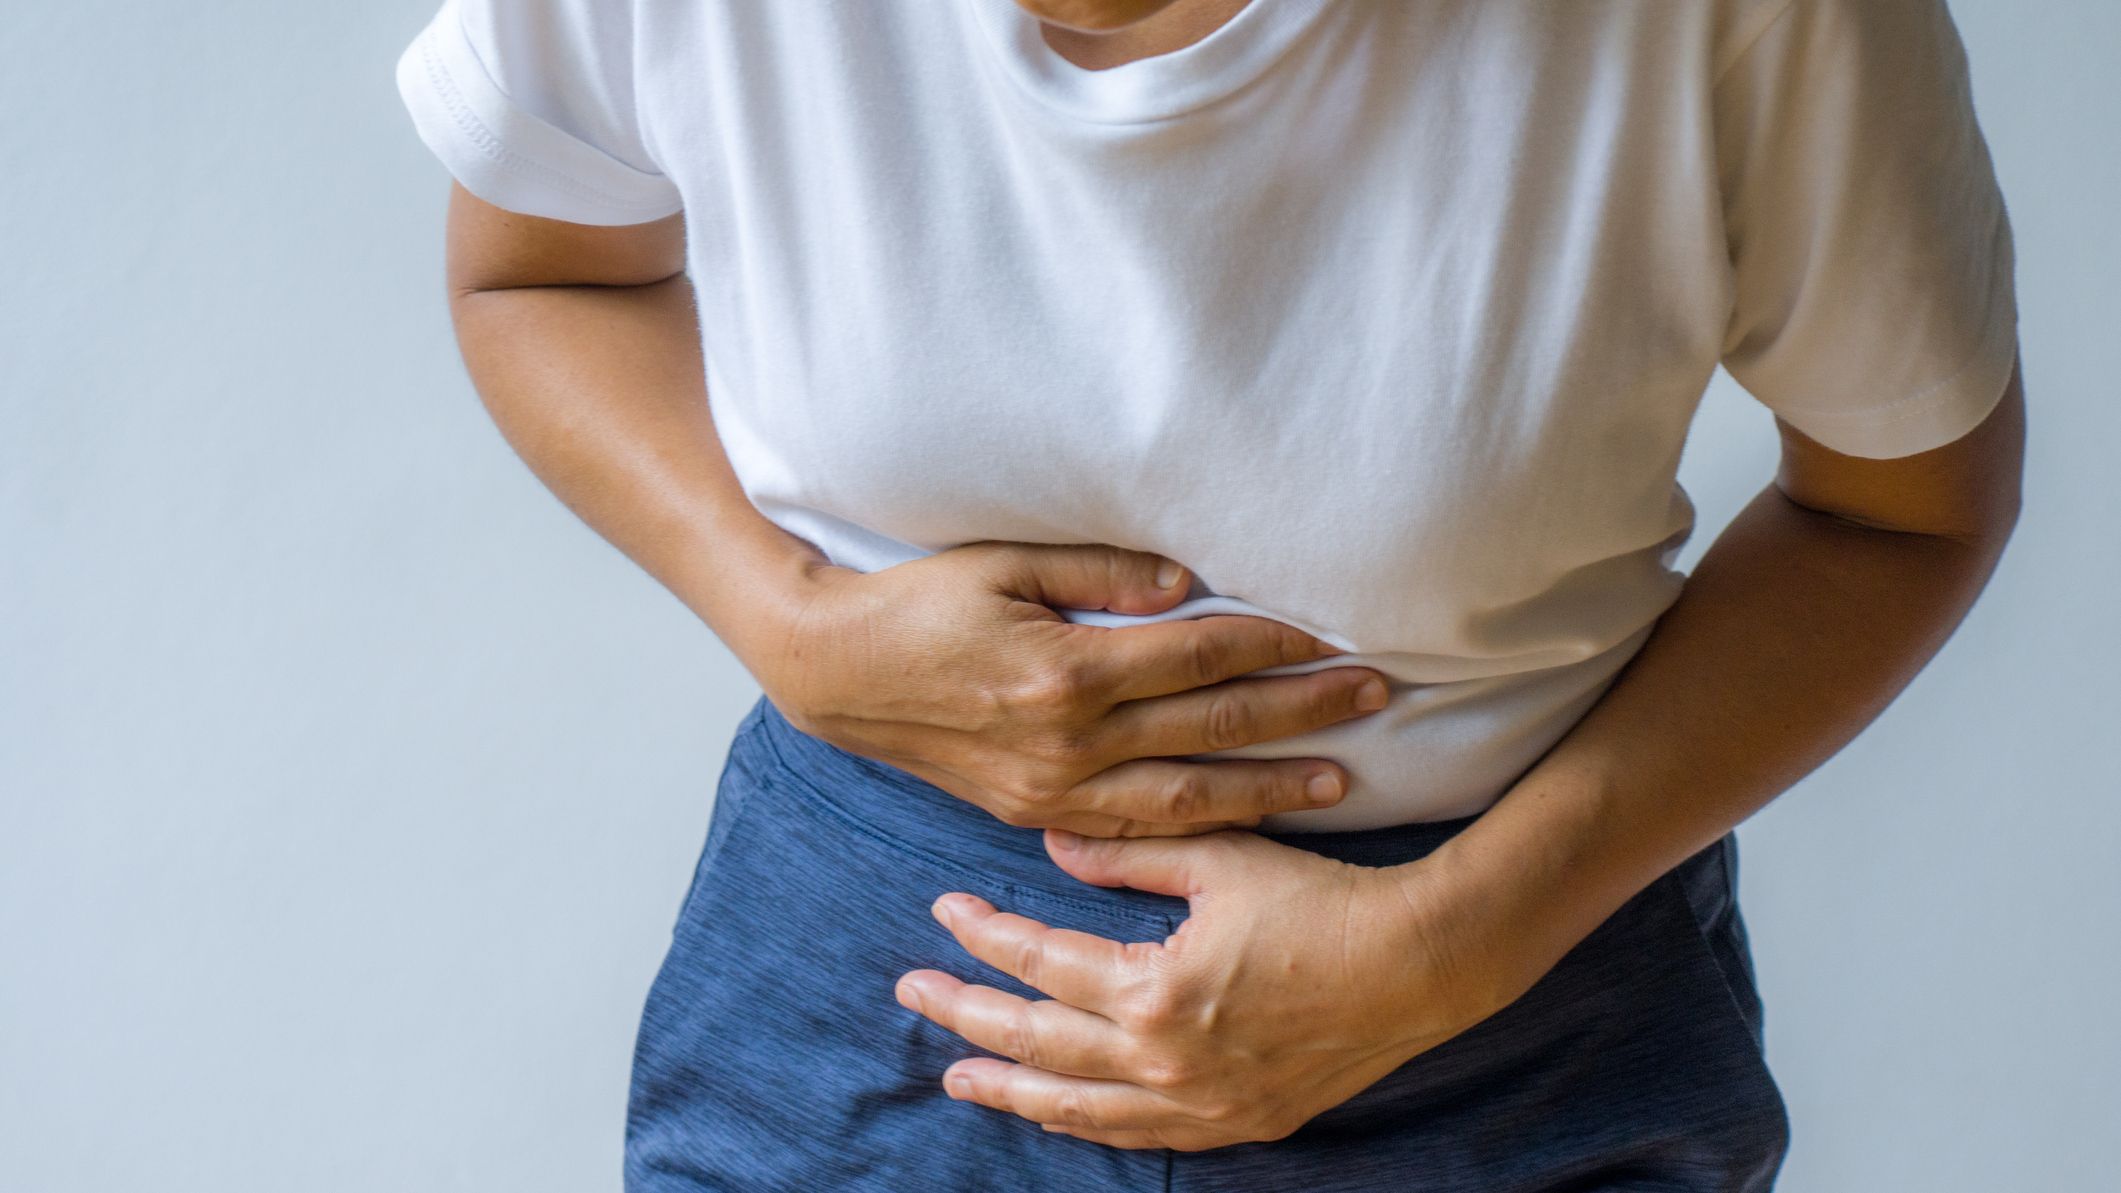 Abdominal Pain Causes, Treatments - Why Does My Stomach Hurt?